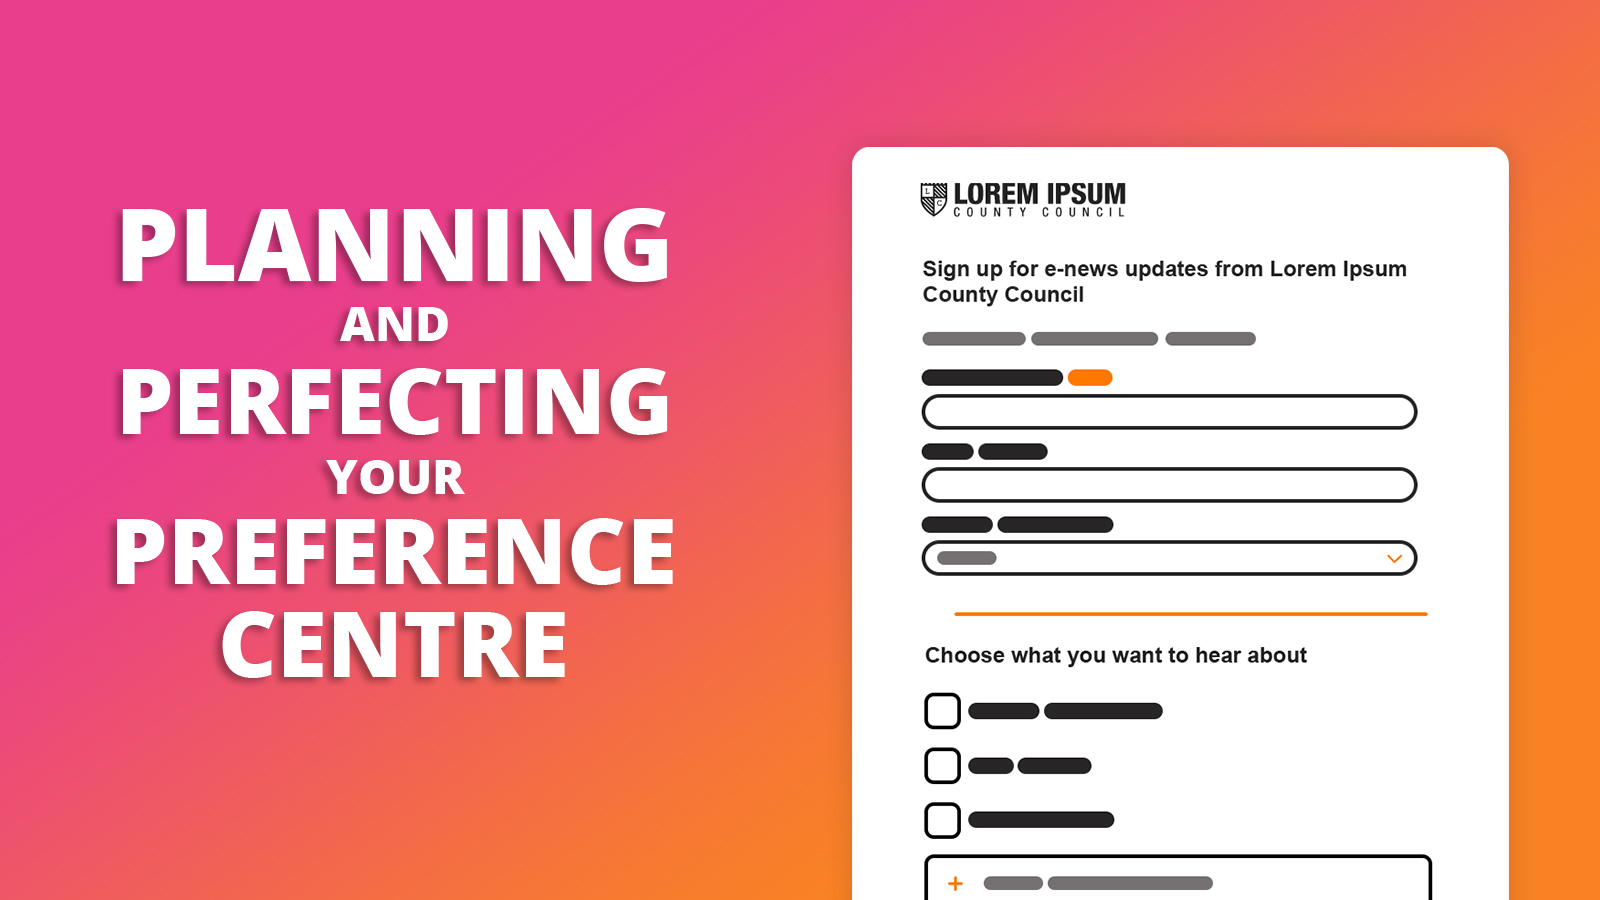 Planning and perfecting your preference centre